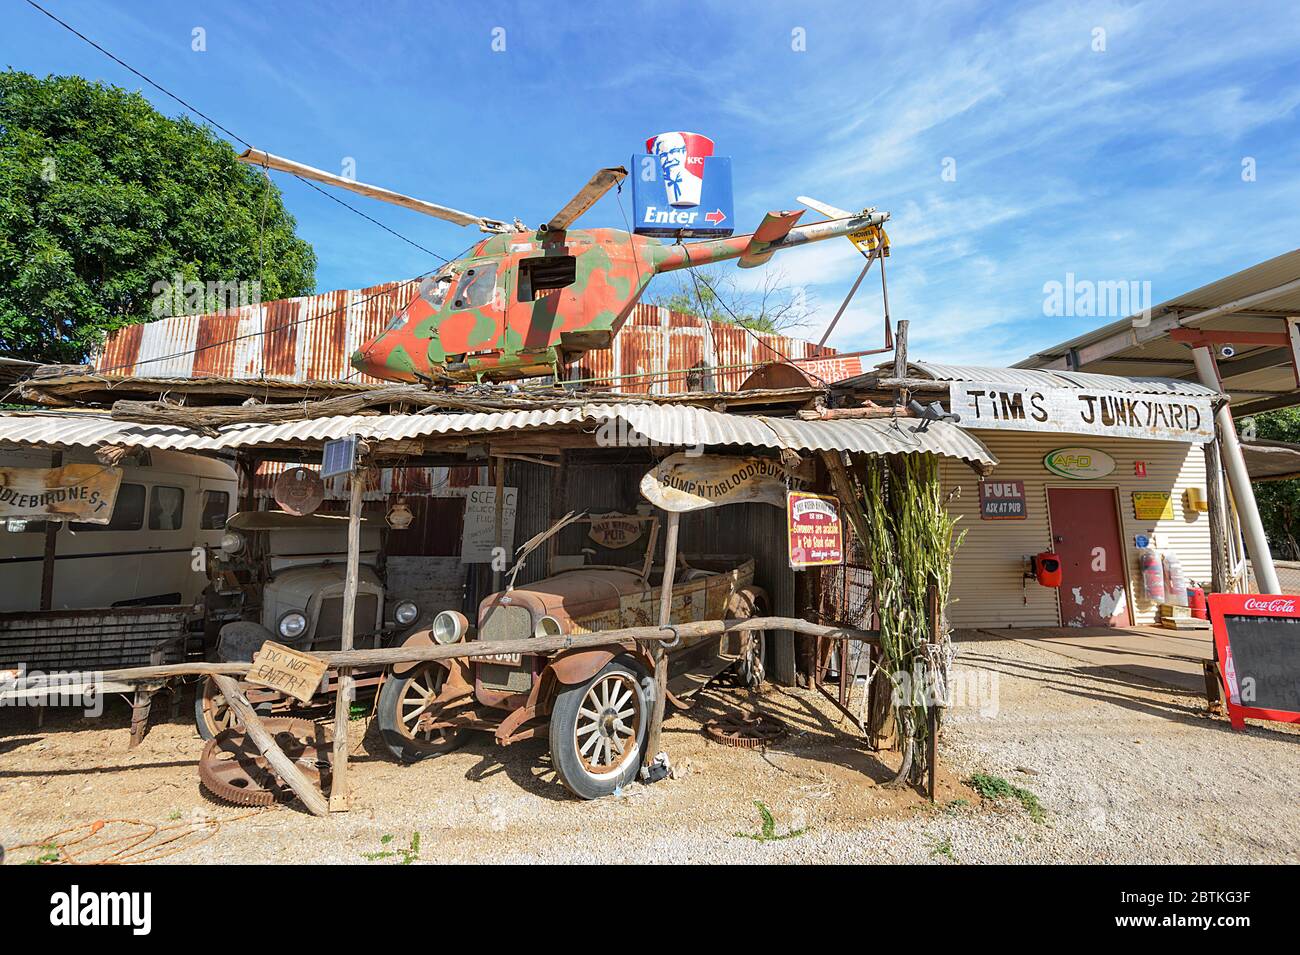 Tim's Junkyard is a petrol station in the small village of Daly Waters along the Stuart Highway, Northern Territory, NT, Australia Stock Photo